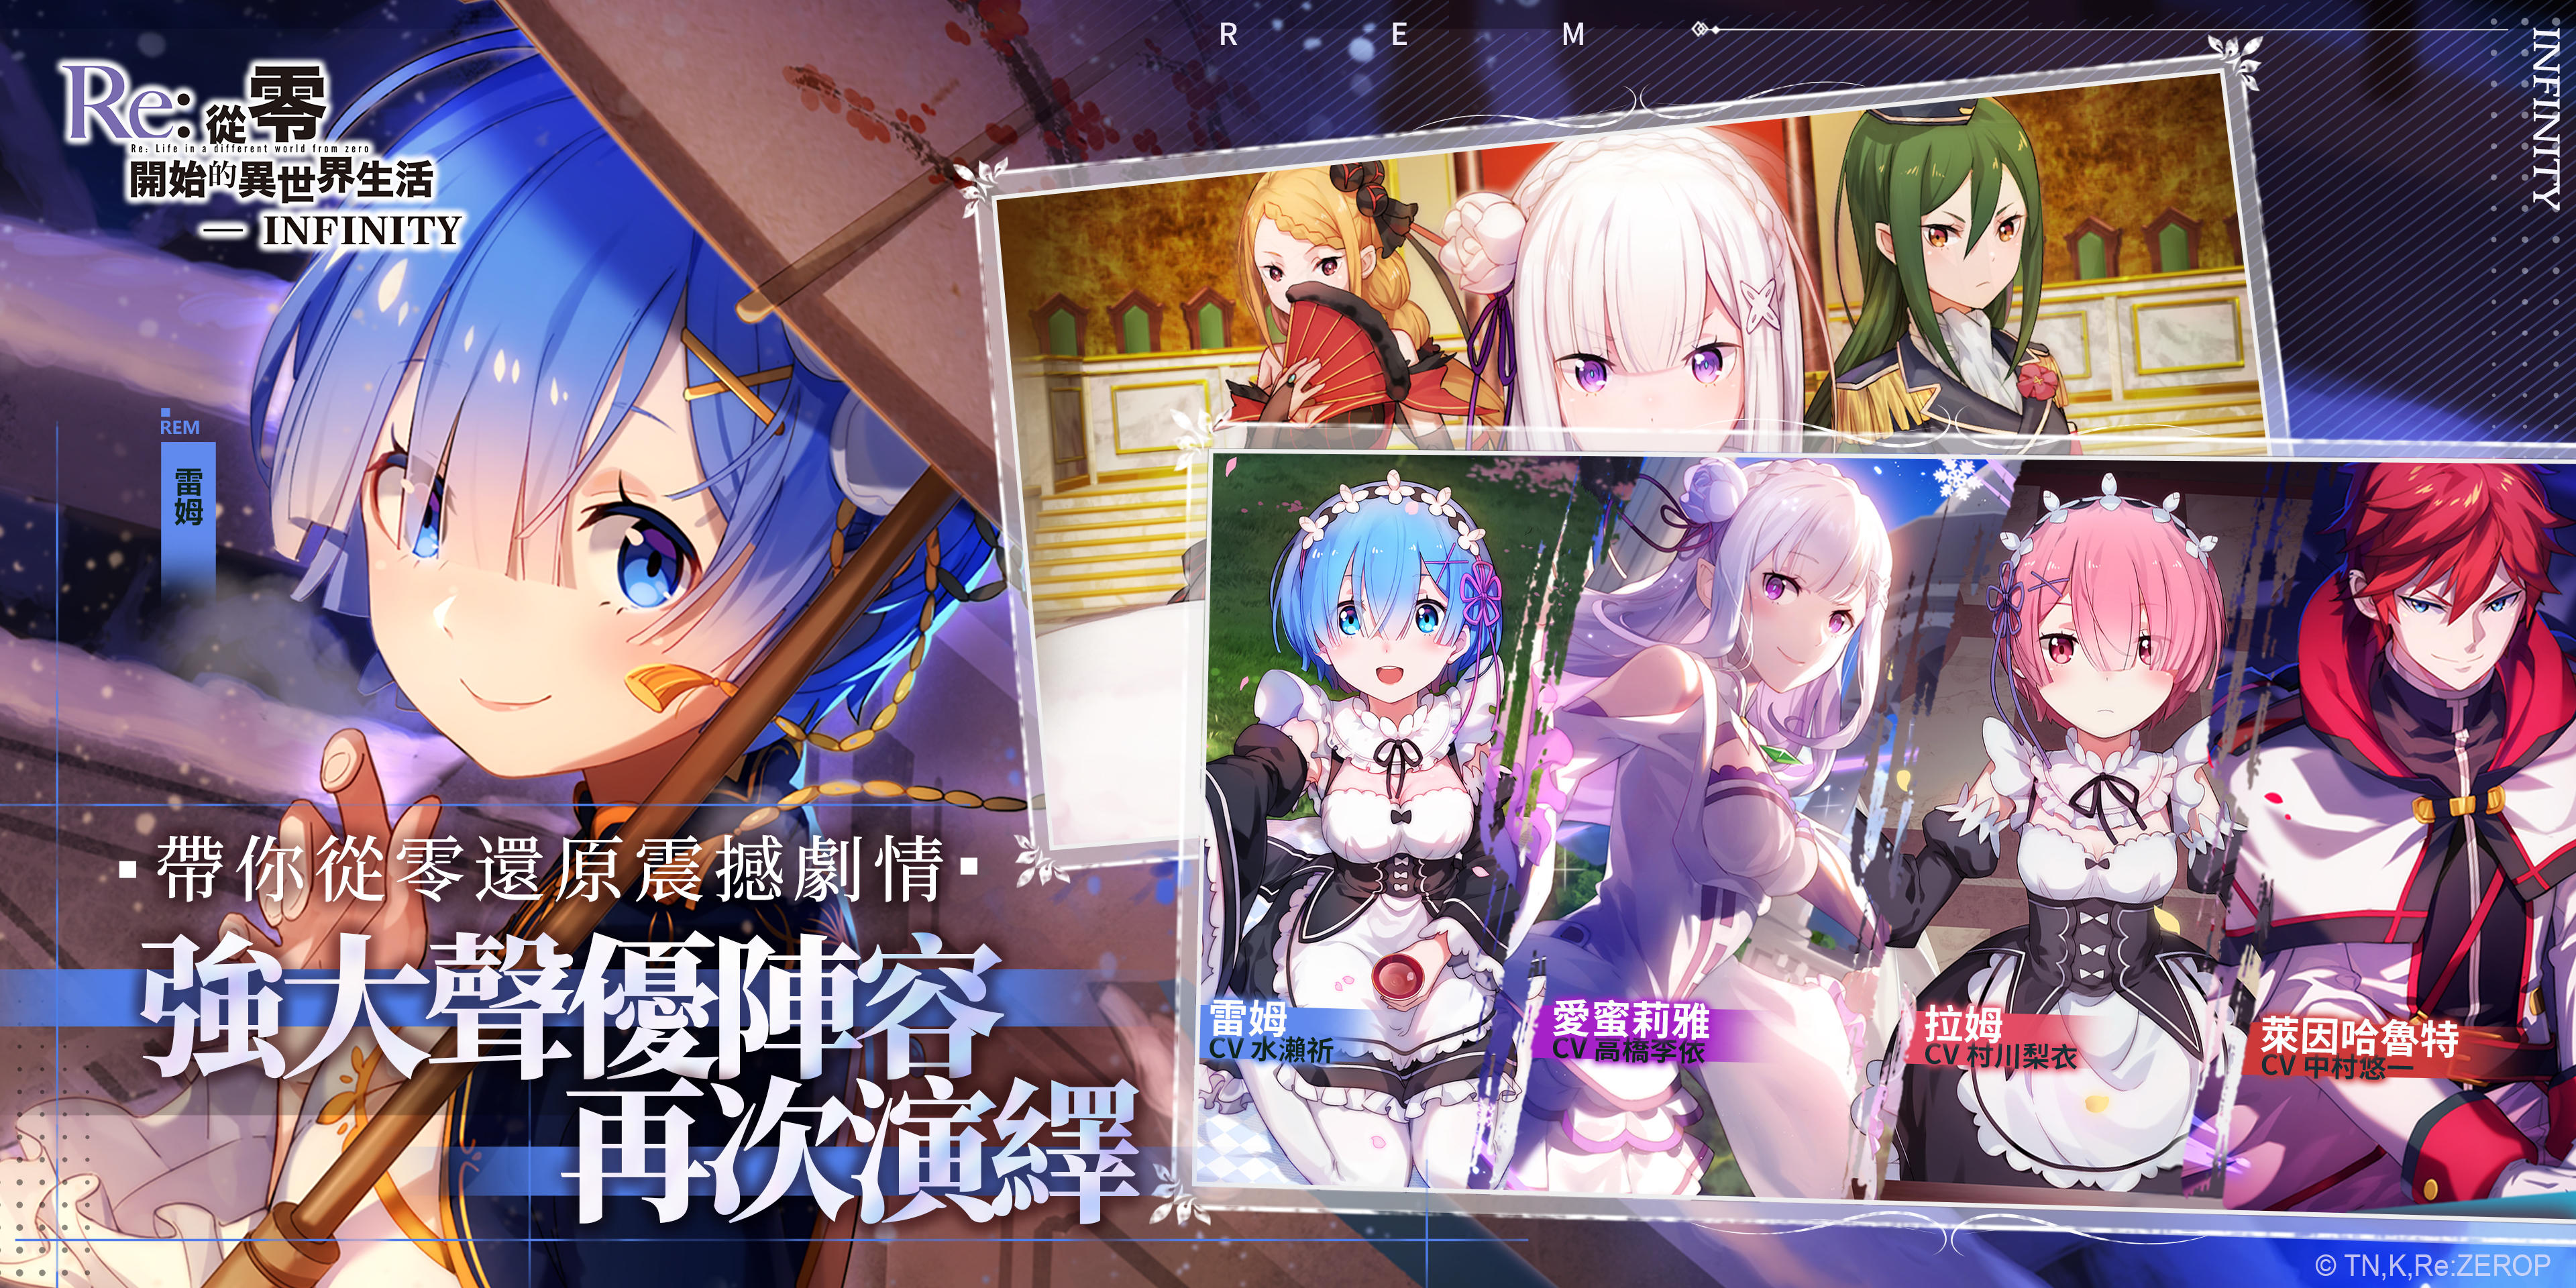 Re:Zero Infinity Turn-Based RPG is Available Now - QooApp News